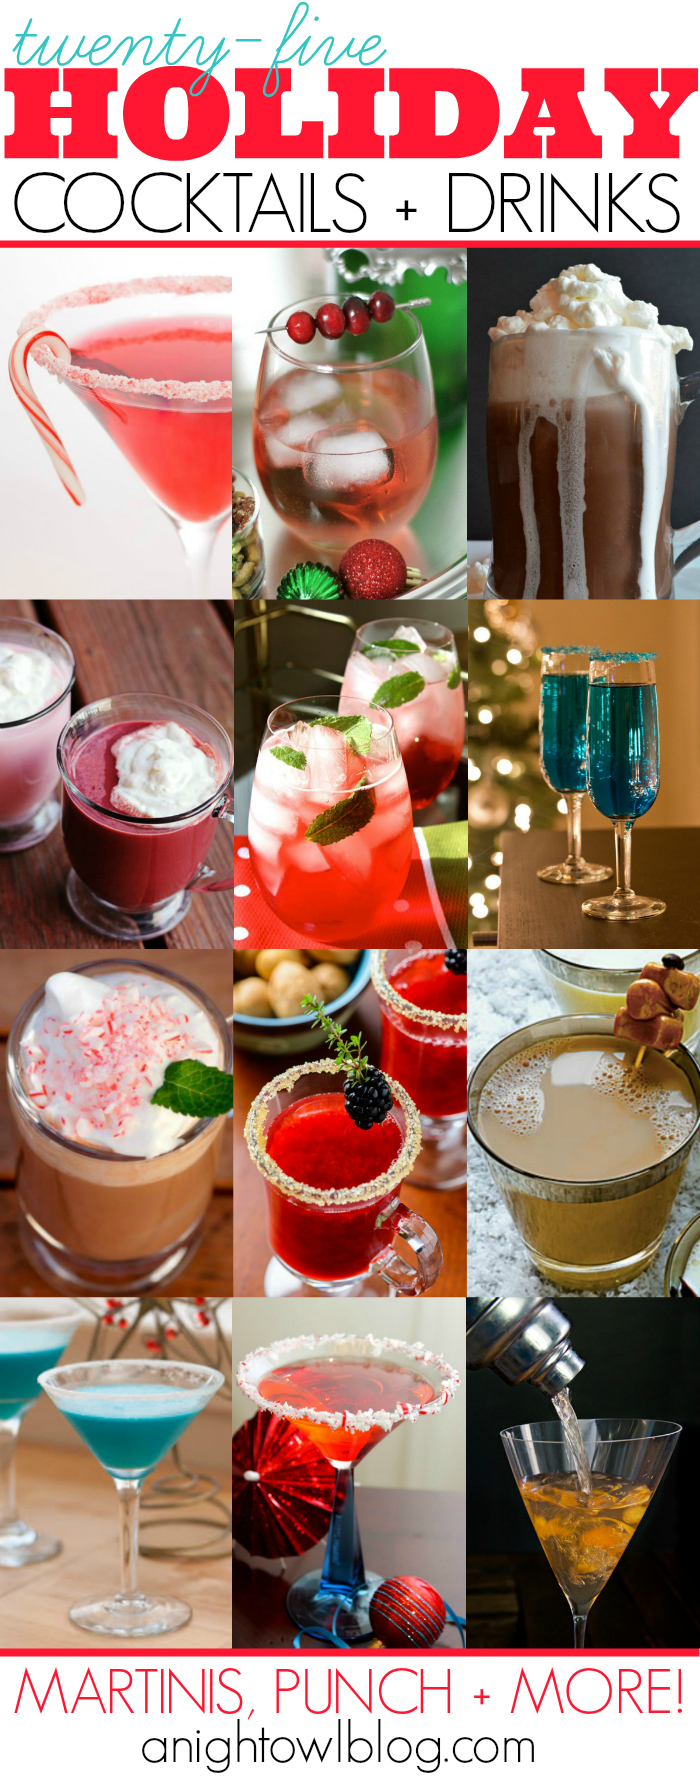 This holiday season serve your guests fun and festive holiday cocktails! Here is one tasty list - martinis, punch and more!